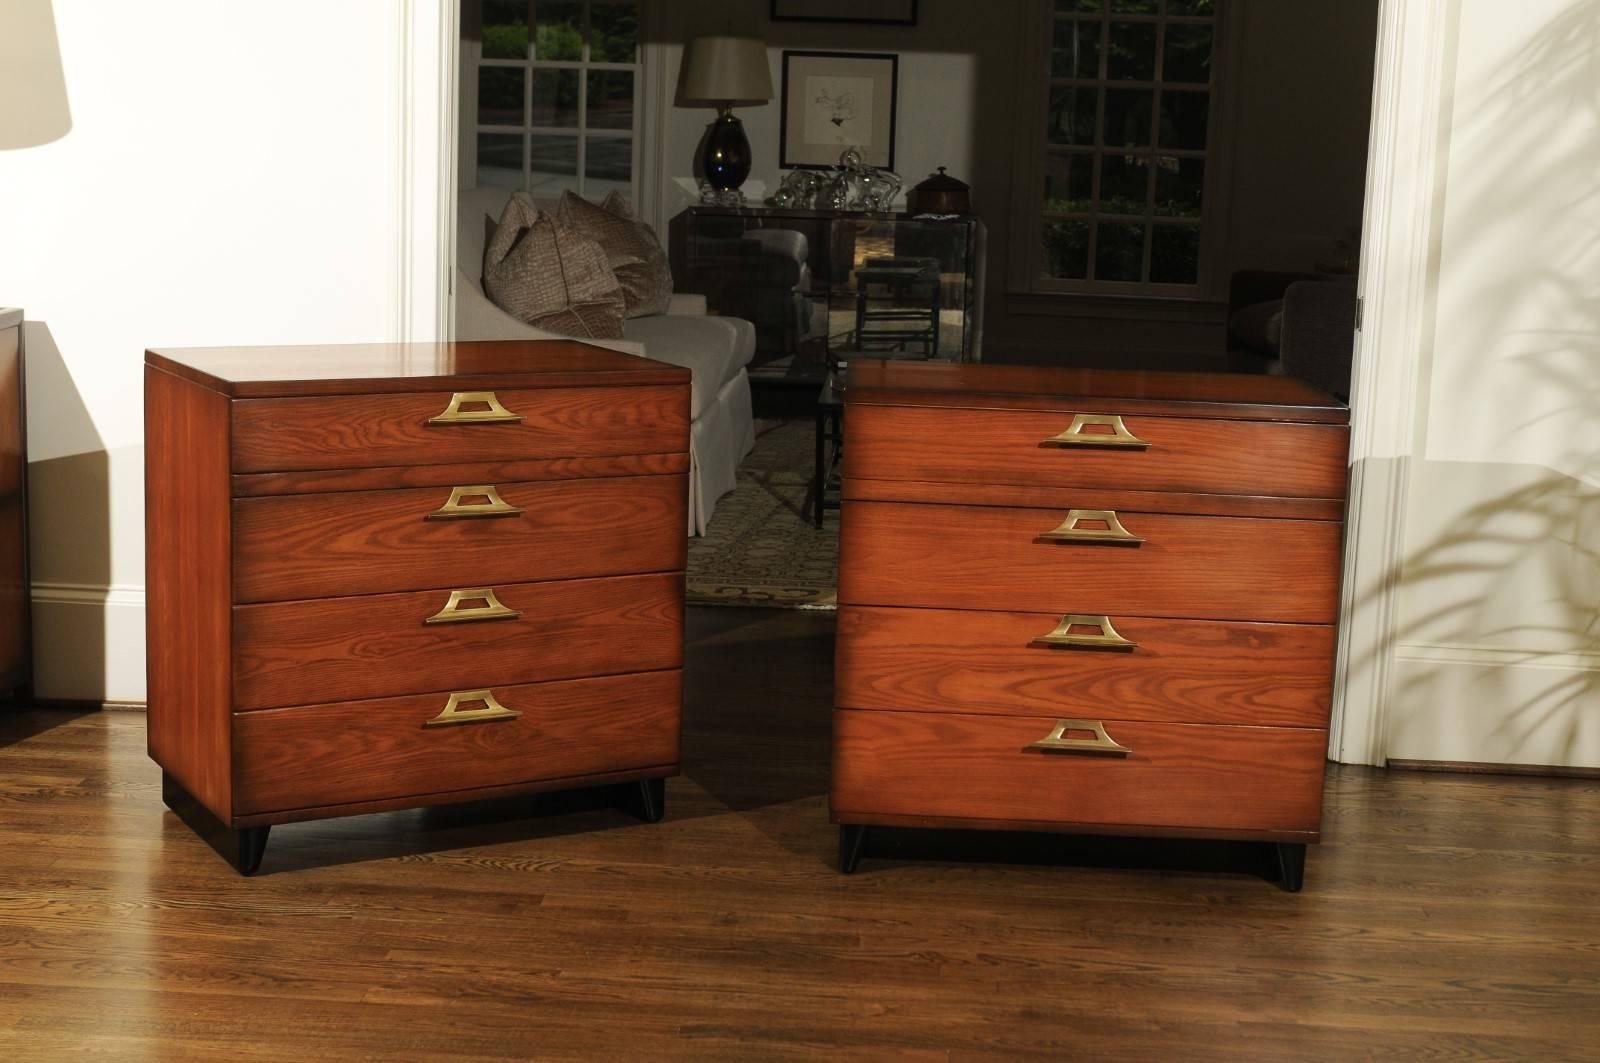 This magnificent chests are shipped as professionally photographed and described in the listing narrative: Meticulously professionally restored and completely installation ready. These rare examples are unique on the World market.

An exceptional